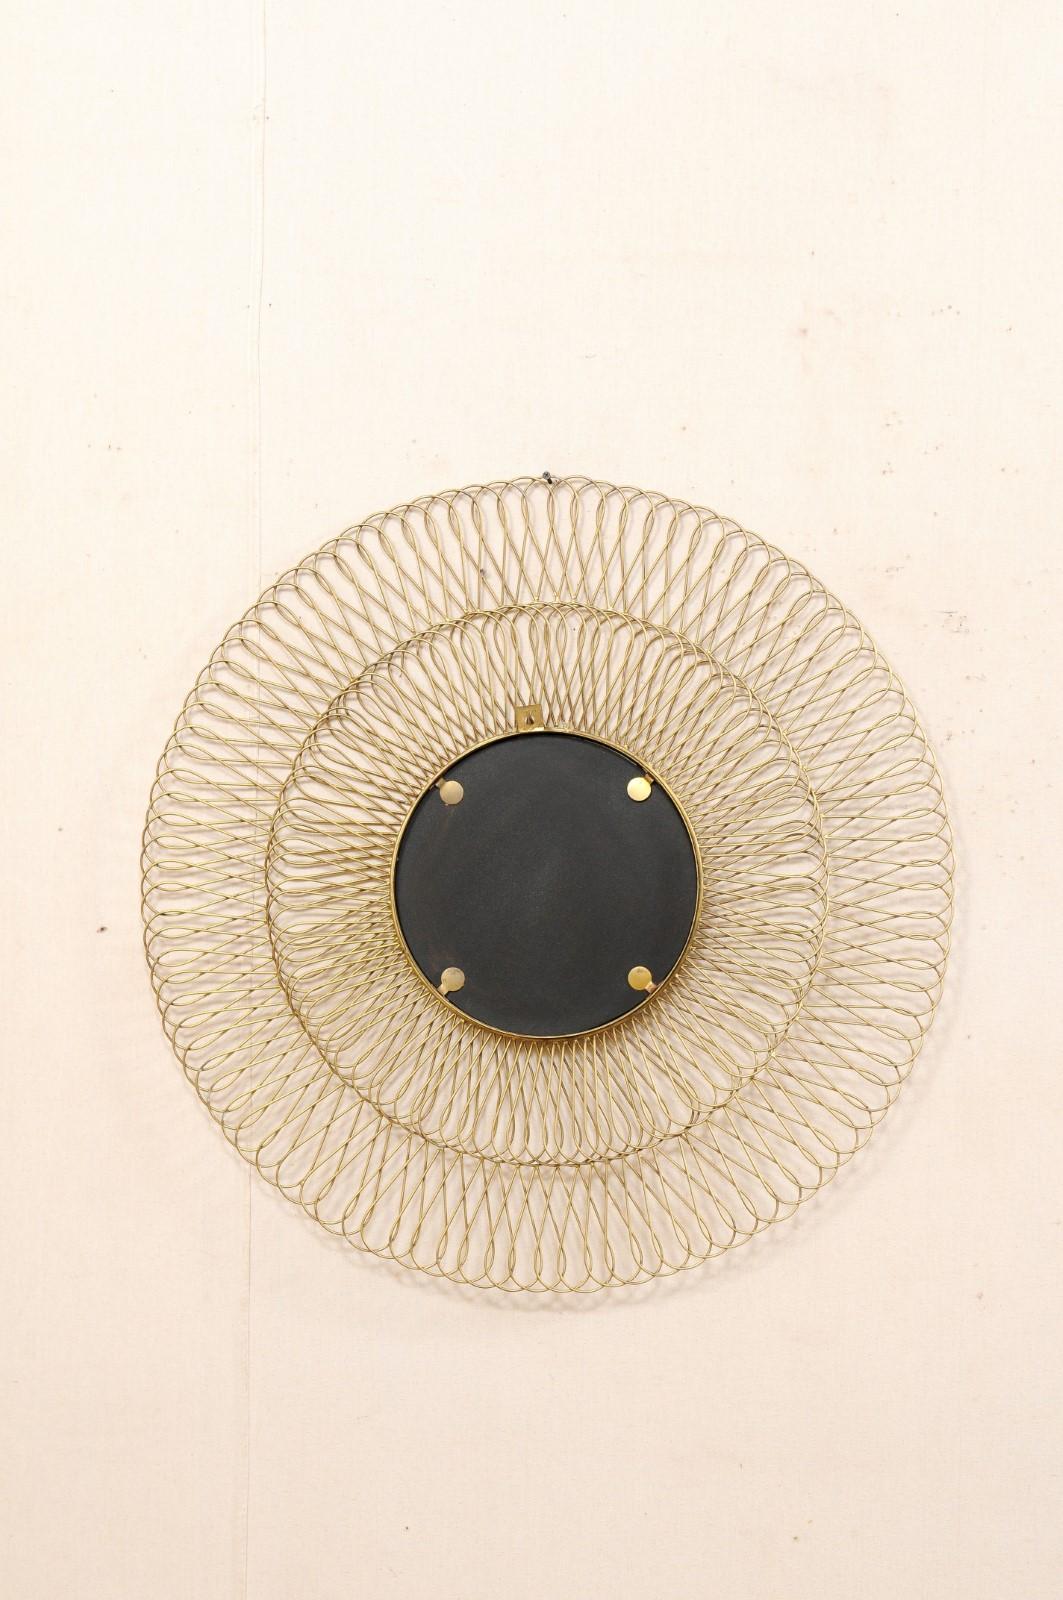 Spanish Round-Shaped Brass Mirror with Open Intertwining Loop Surround For Sale 7